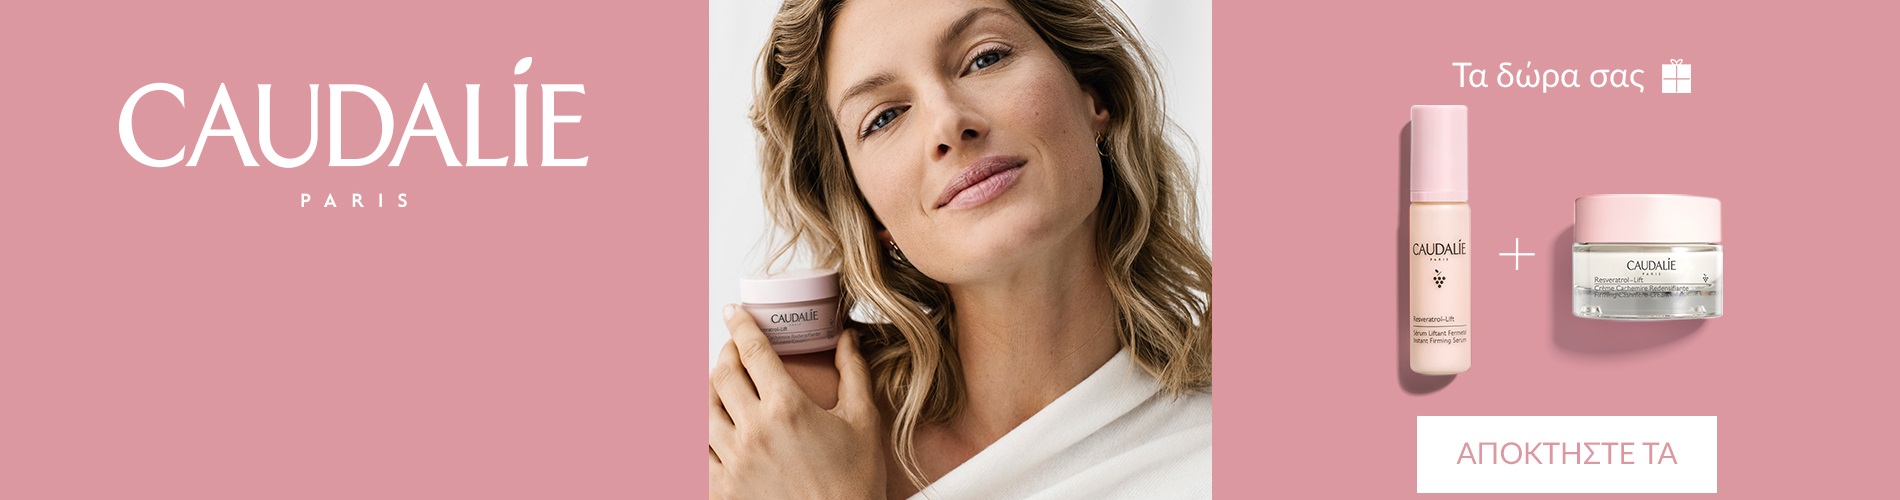 With Caudalie purchases worth €39 or more, FREE image